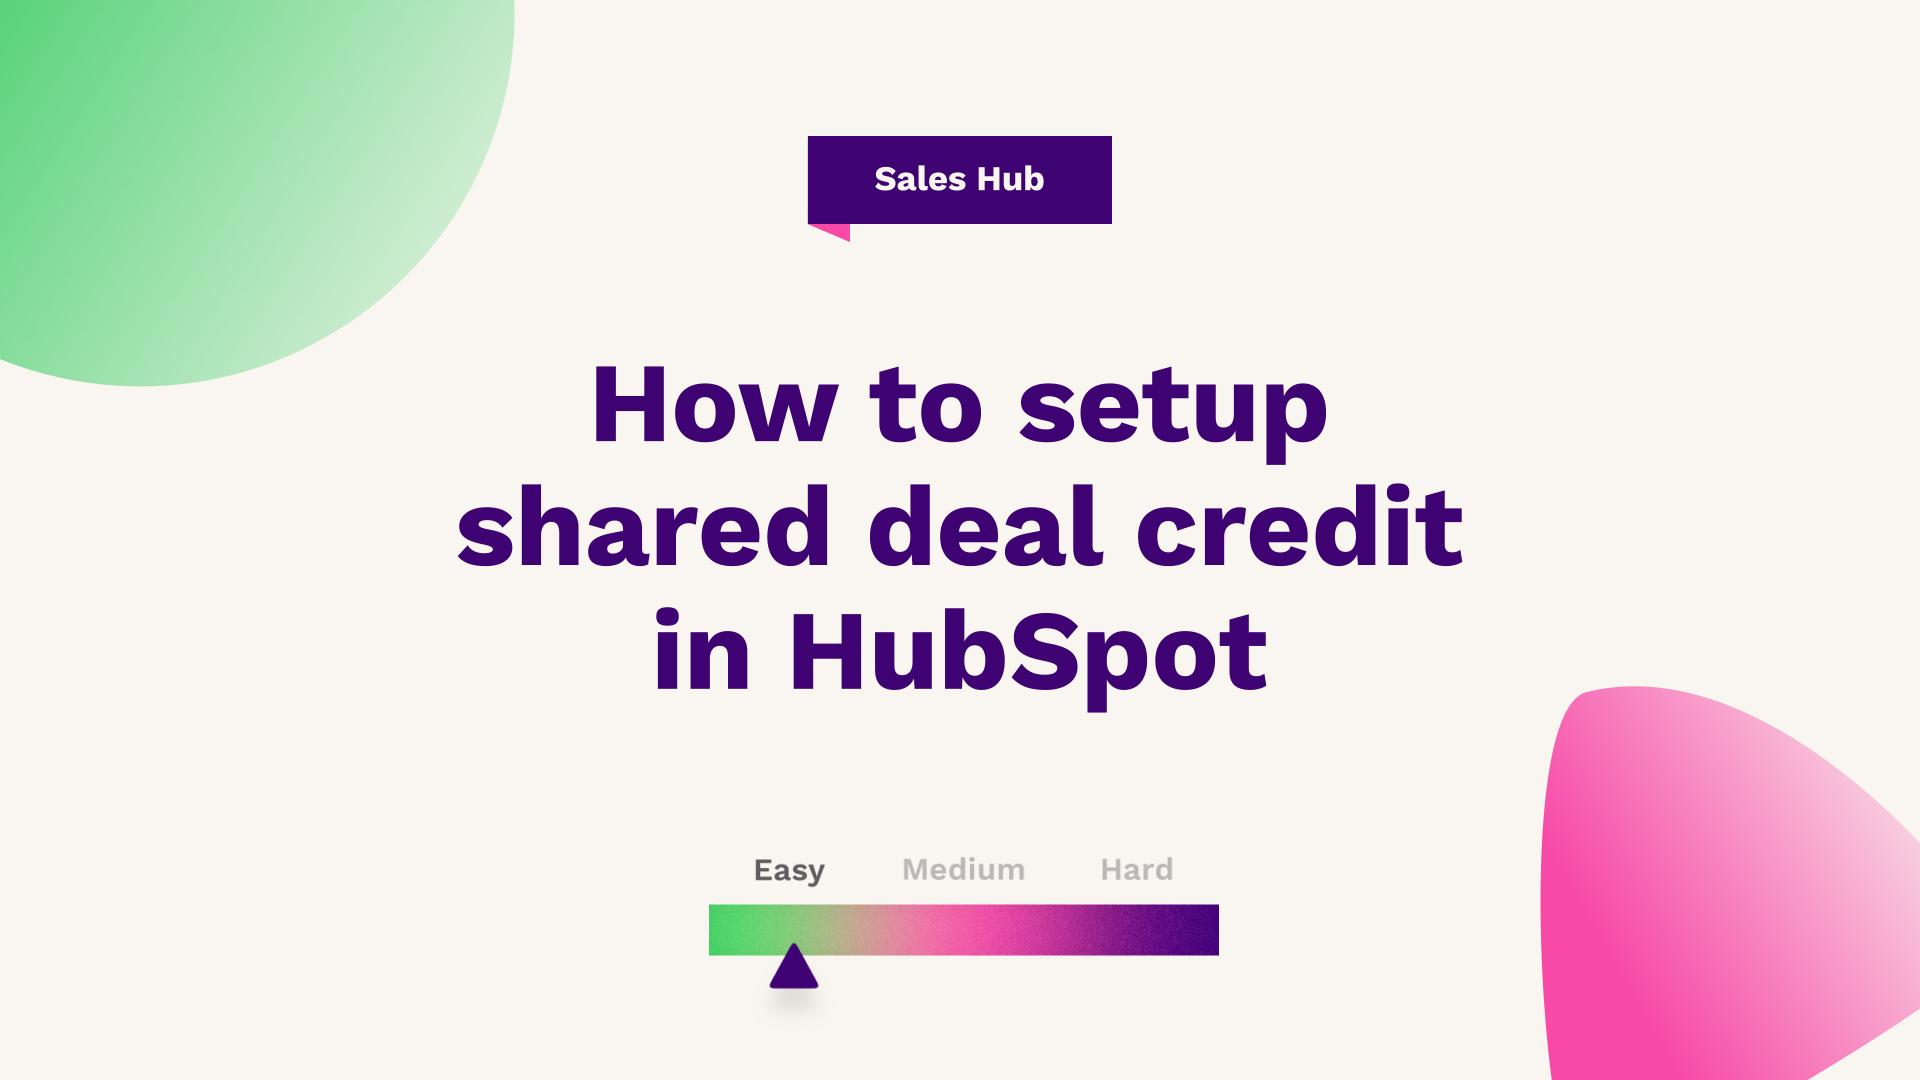 How to set up shared deal credit in HubSpot